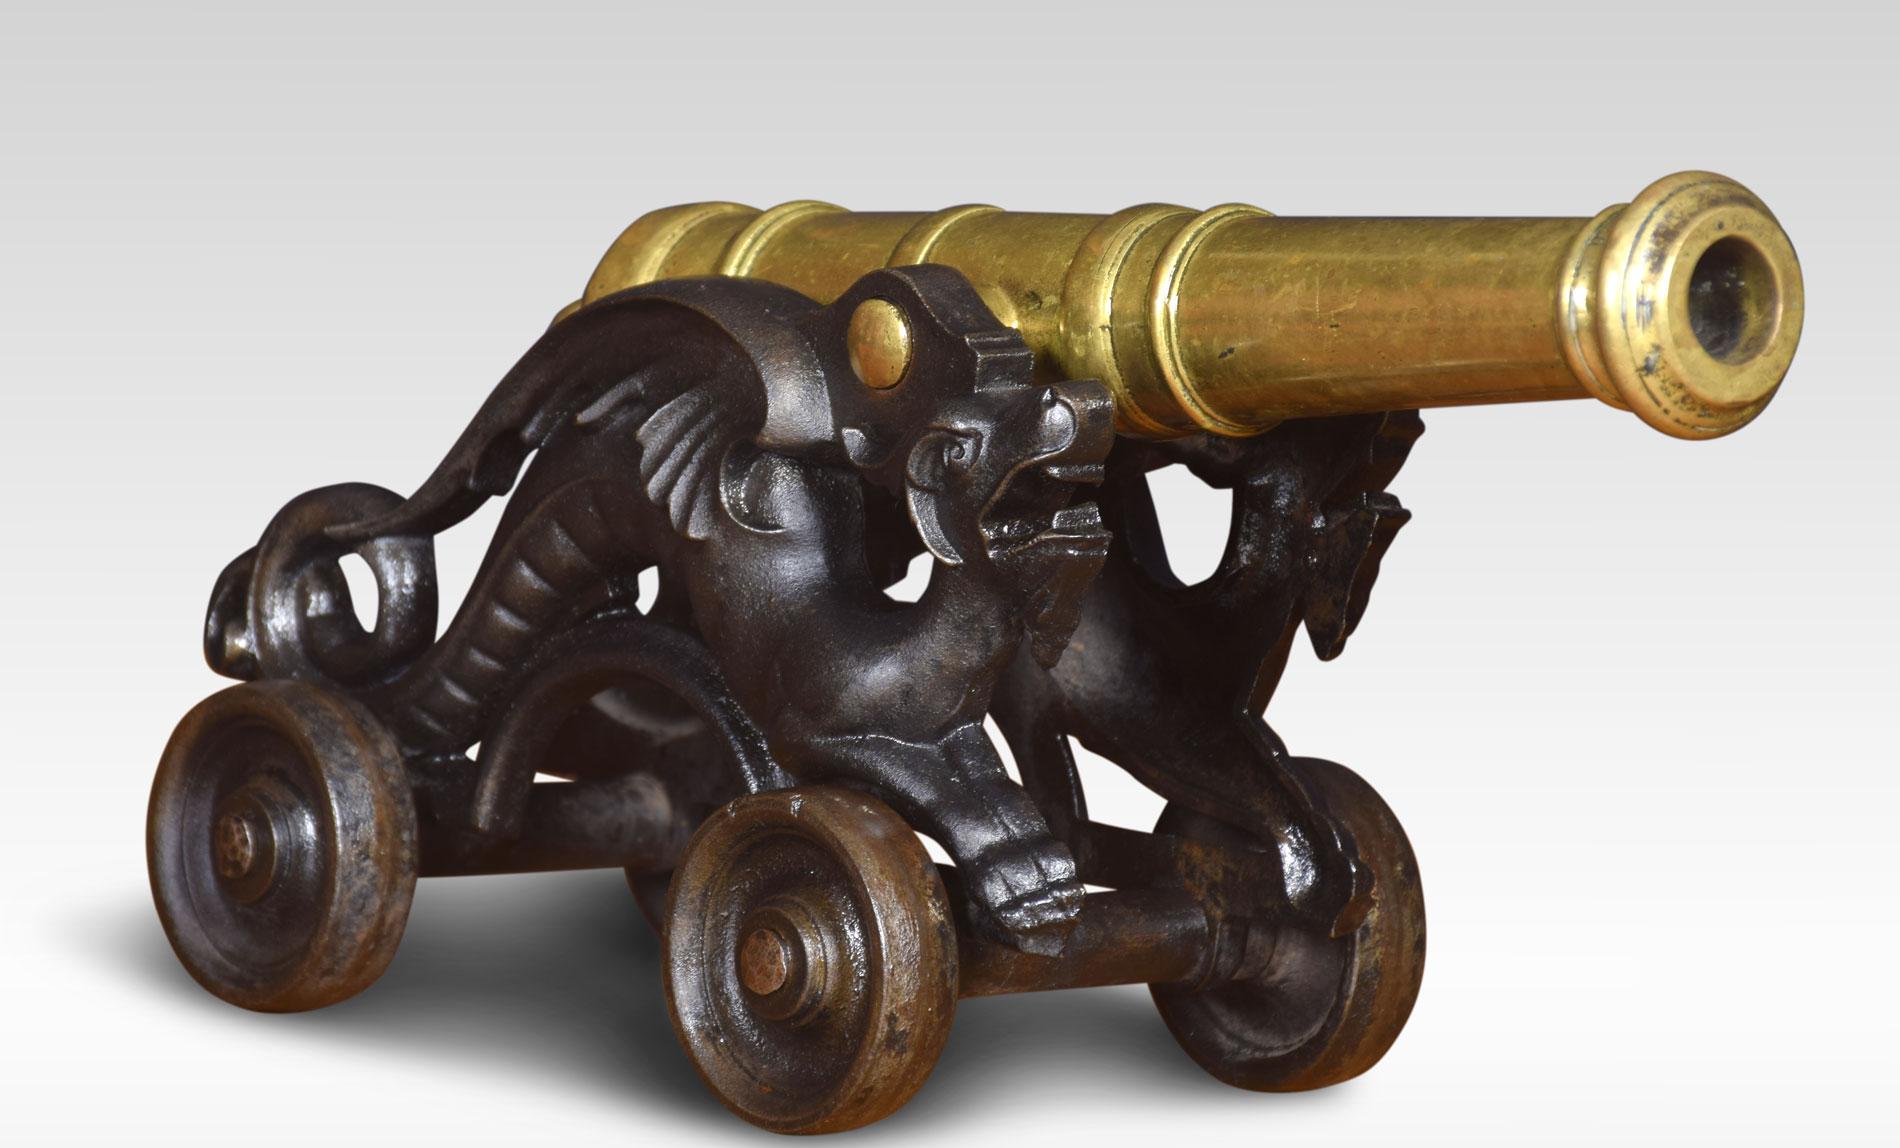 Pair of Chinese brass ornamental signal cannons on cast iron carriages. Each with solid brass 15 inch tilting barrel resting on a scrolled dragon frame above working wheels.
Dimensions:
Height 9 inches
Length 17.5 inches
width 6.5 inches.